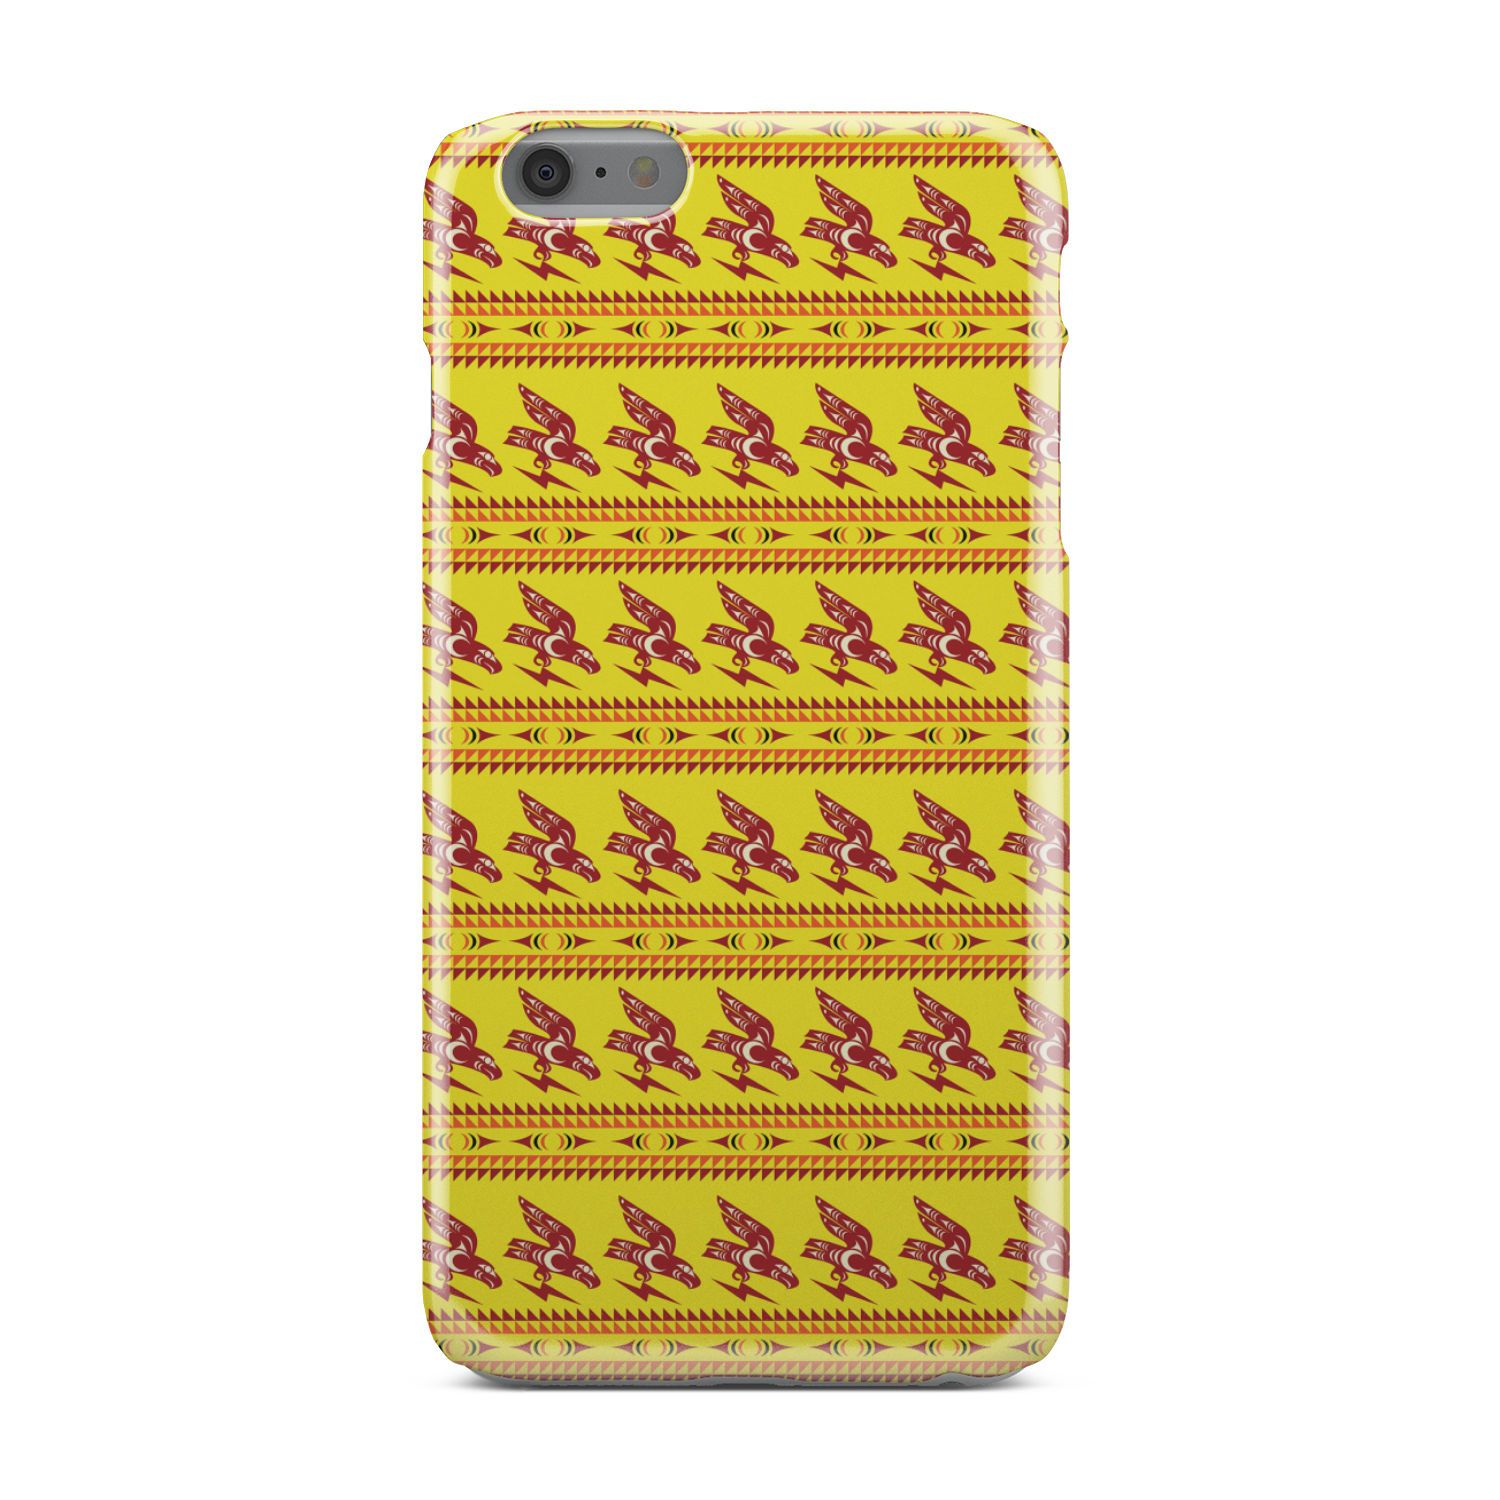 Ovila Mailhot Design : Eagle Brings Good Vibes Yellow Phone Case Phone Case wc-fulfillment iPhone 6s Plus 